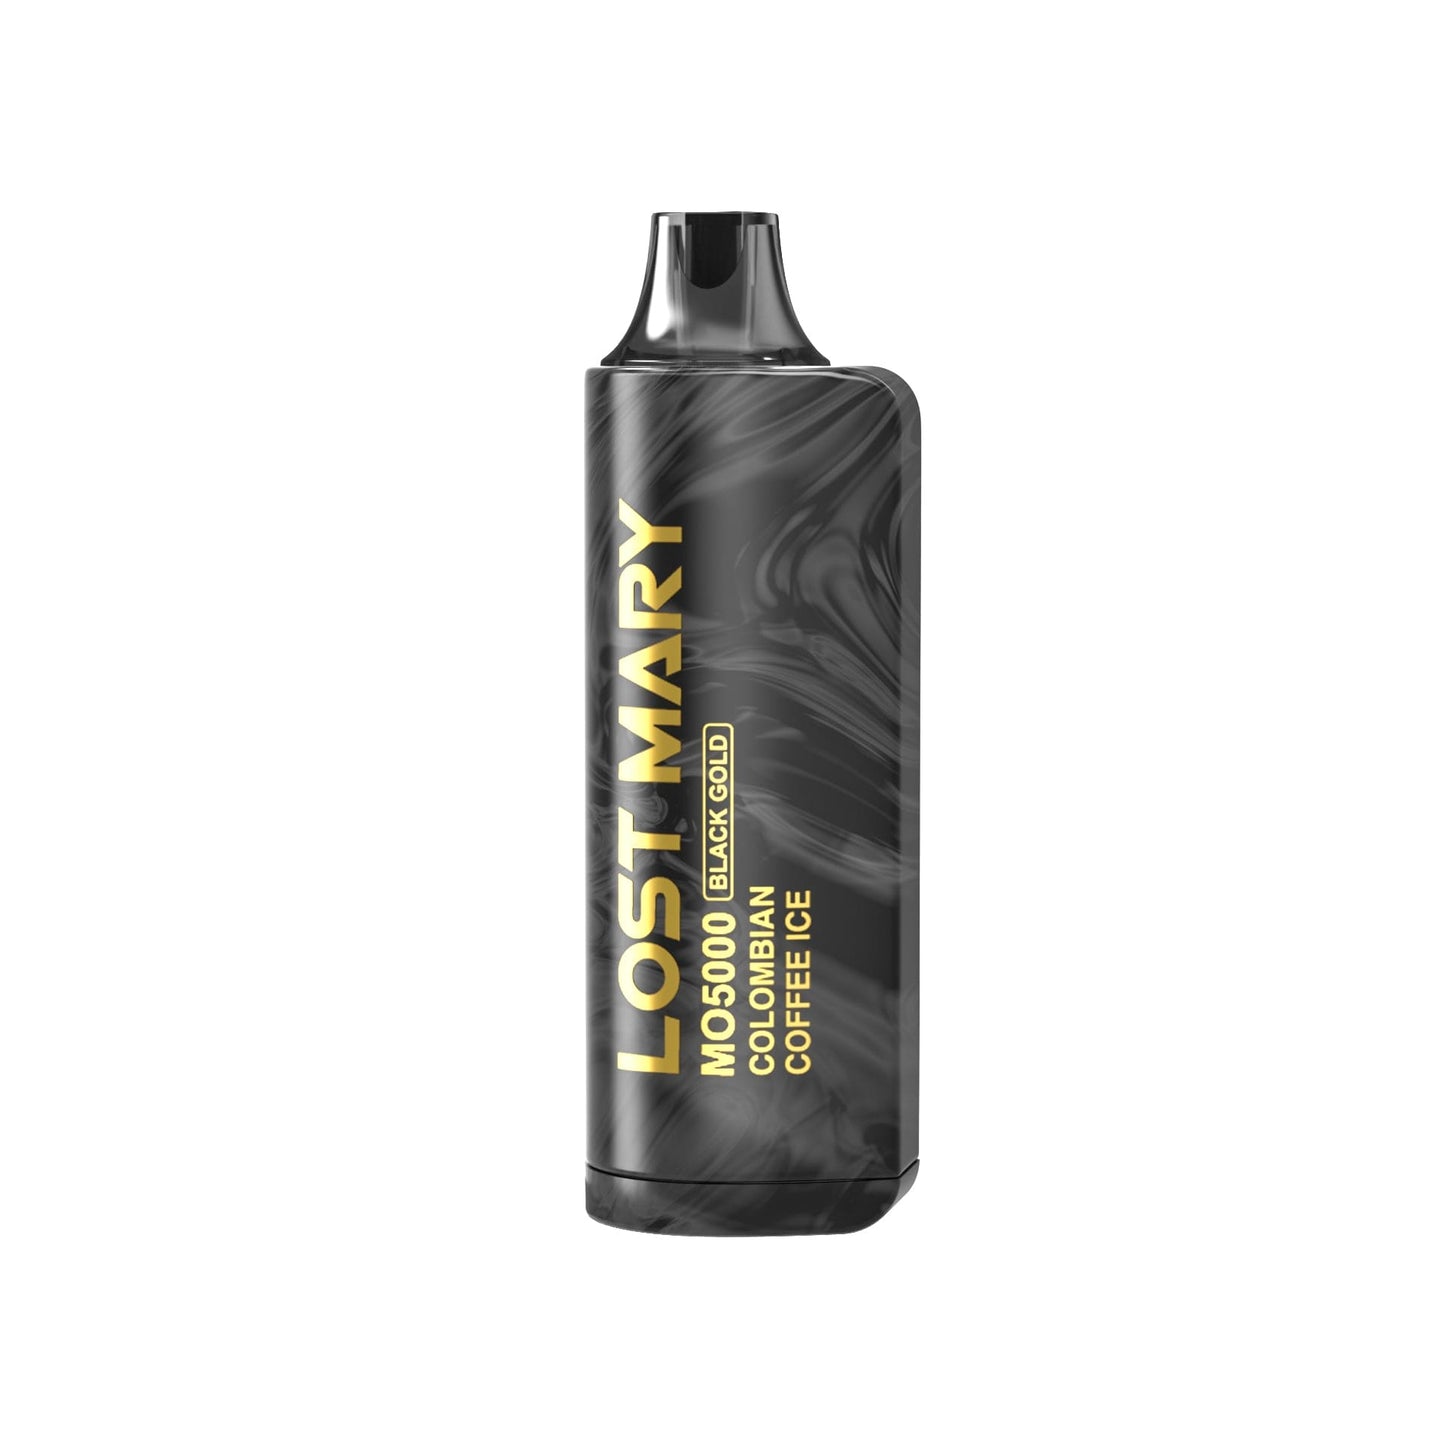 Lost Mary MO5000 Black Gold Disposable 10mL (5/Pack)